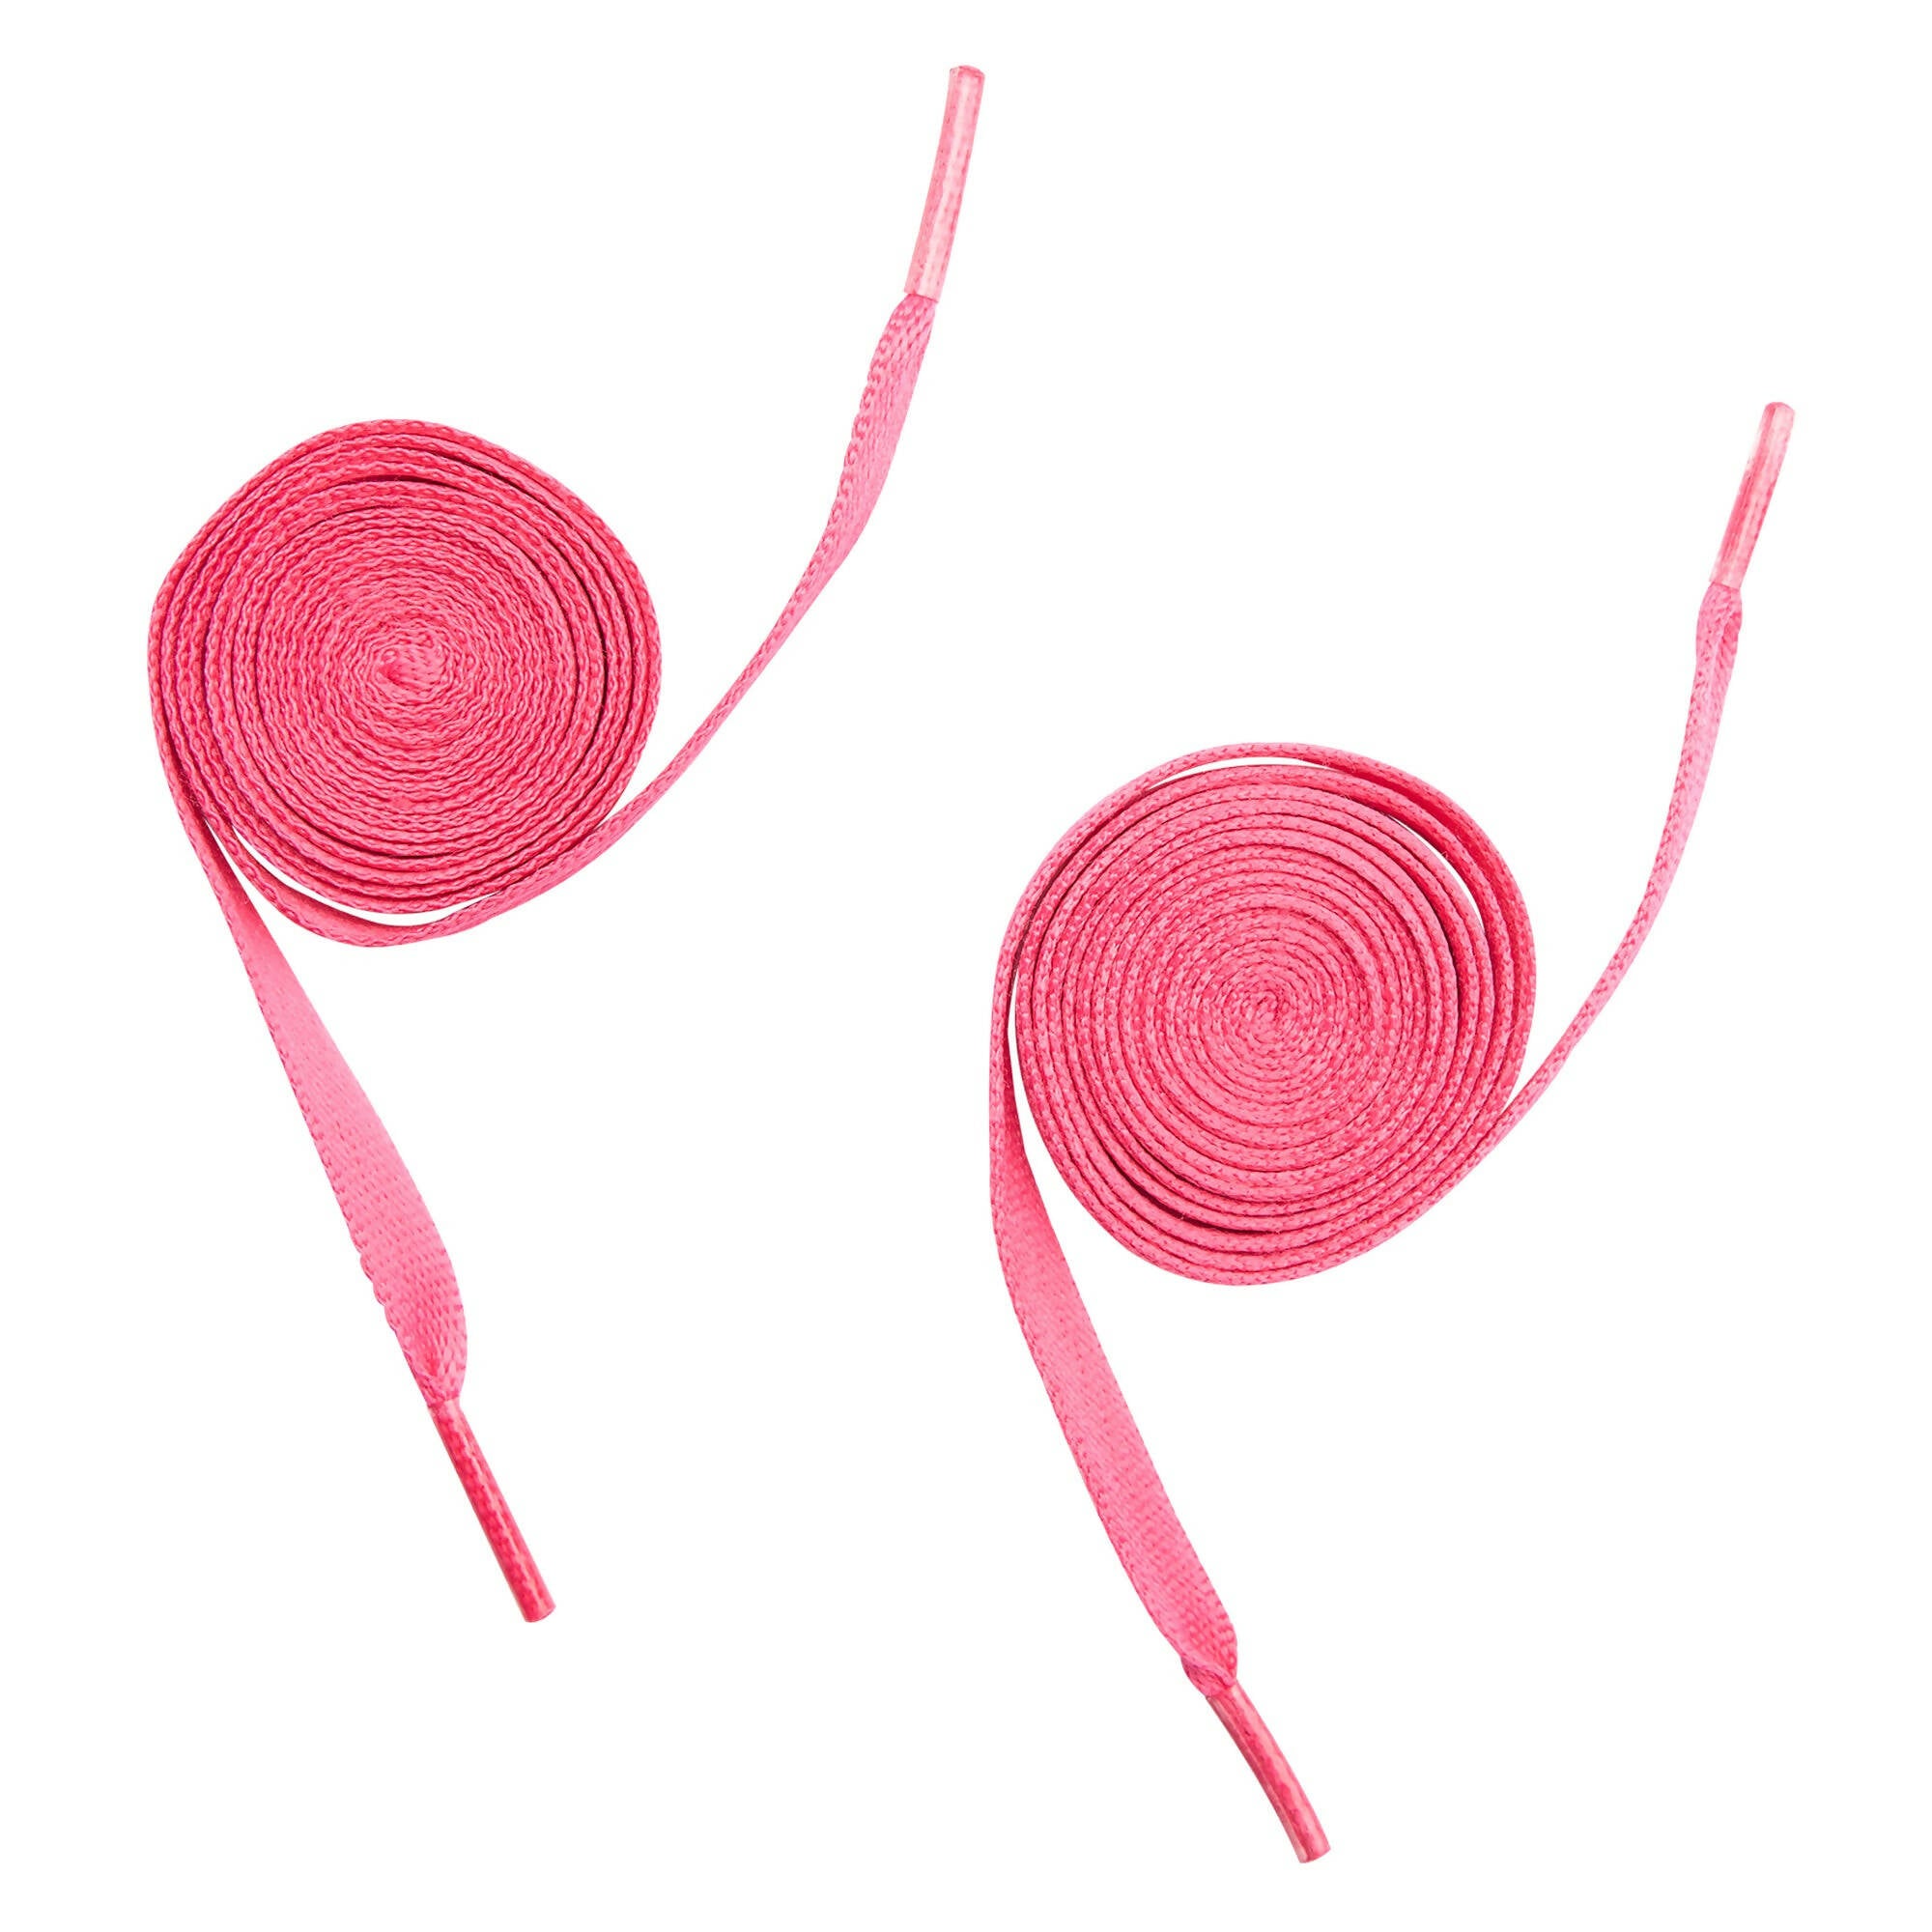 Flat Laces Pack of 5 ( UNC, Soft Pink,Peach,Punch pink, n.orange)